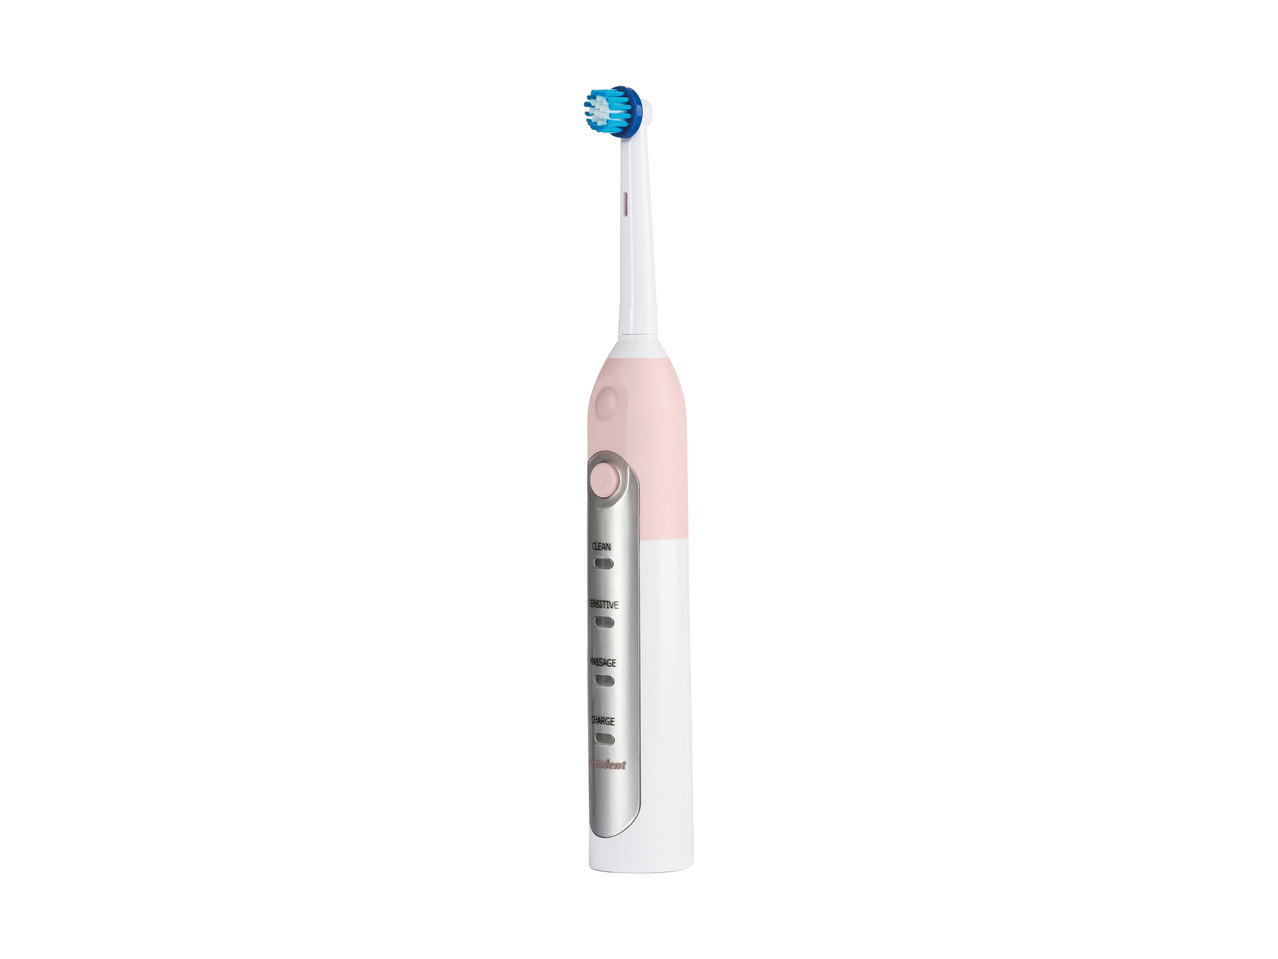 Nevadent Rechargeable Electric Toothbrush1